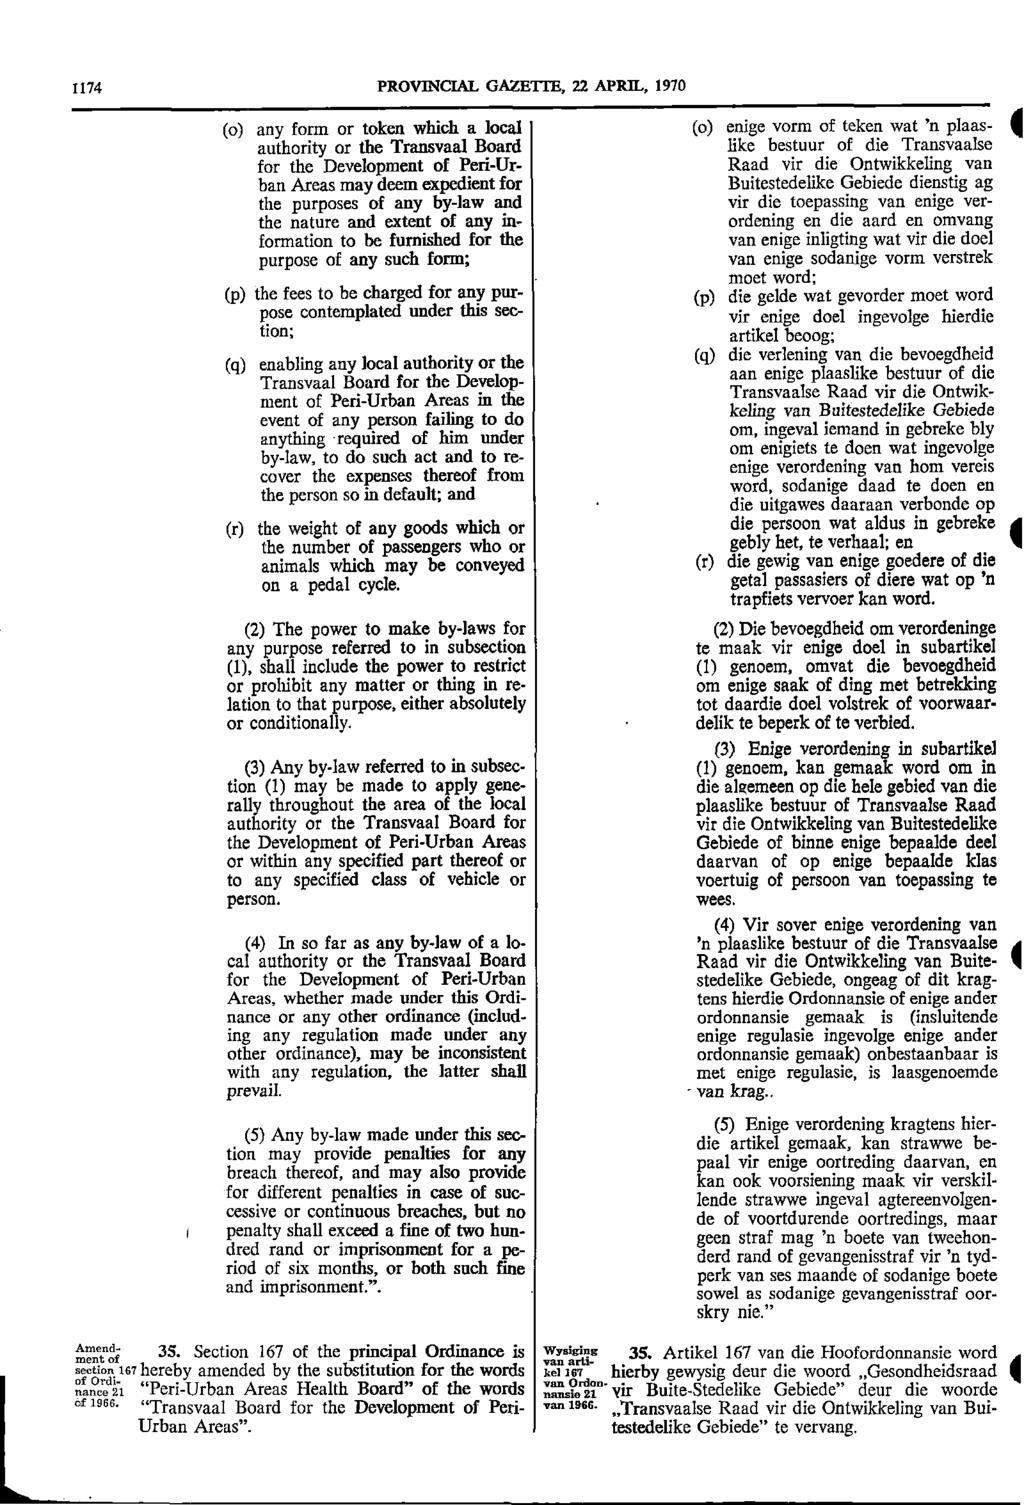 Ls 1 penalty 1174 PROVINCIAL GAZETTE 22 APRIL 1970 (o) any form or token which a local (o) enige vorm of teken wat n plaas 4 authority or the Transvaal Board like bestuur of die Transvaalse for the